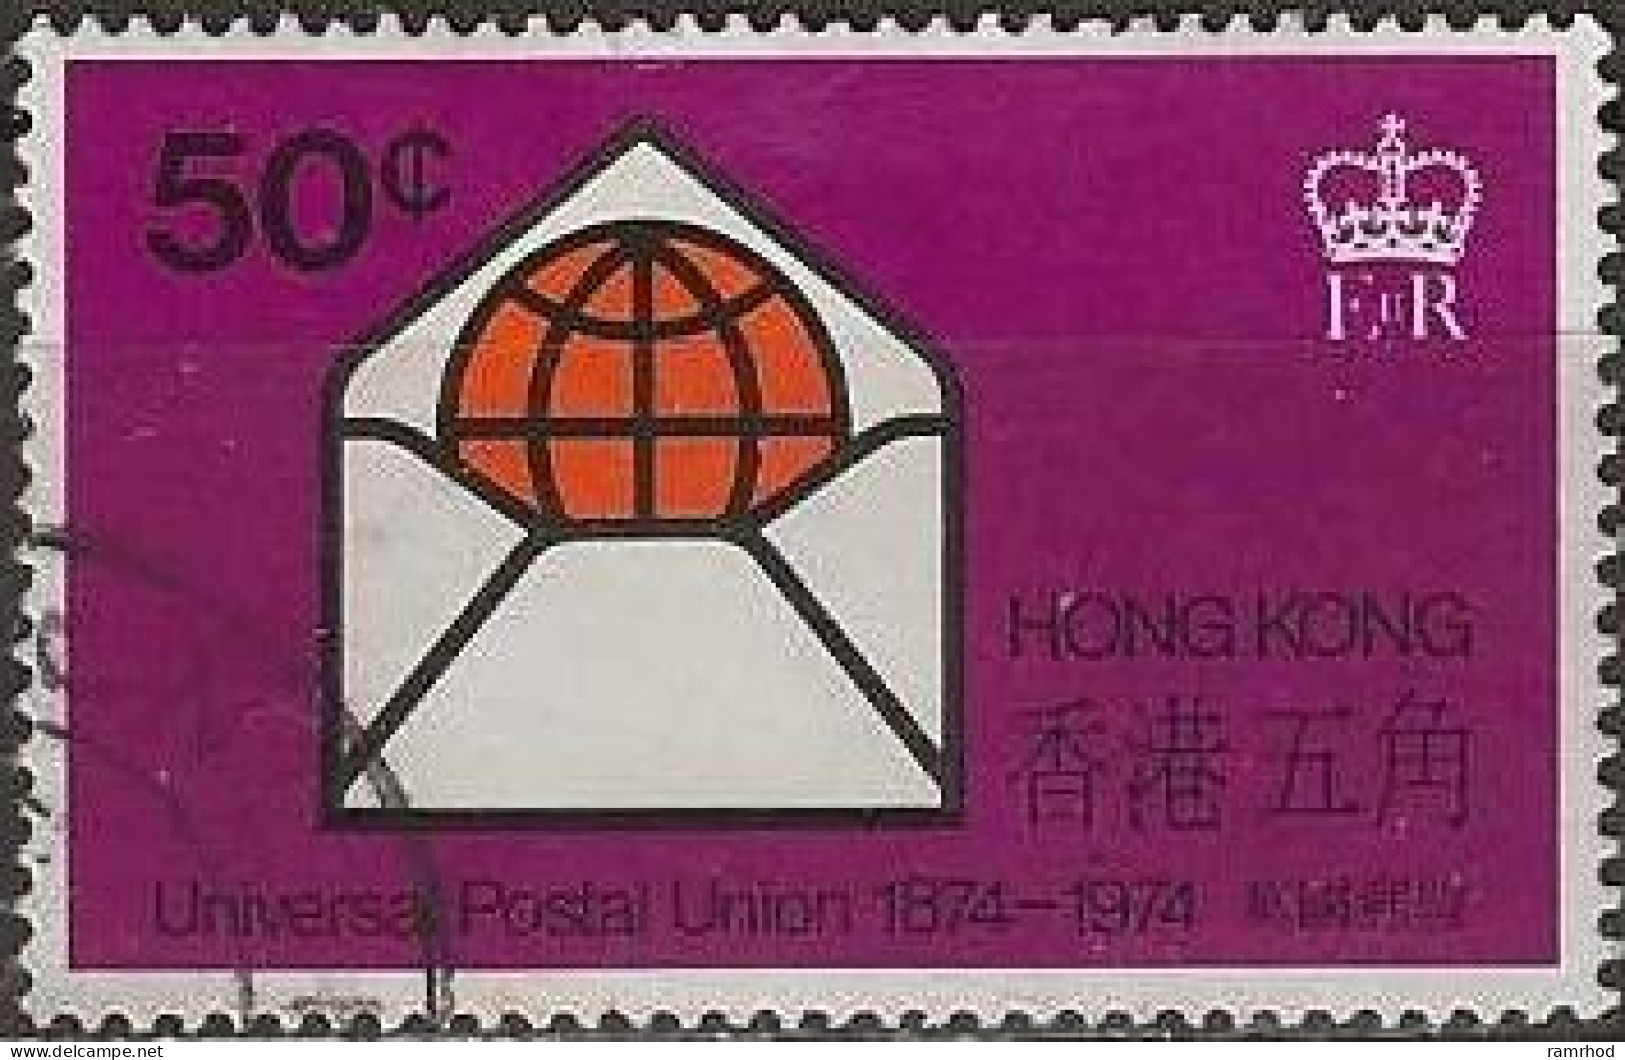 HONG KONG 1974 Centenary Of UPU - 50c. Globe Within Letters FU - Oblitérés